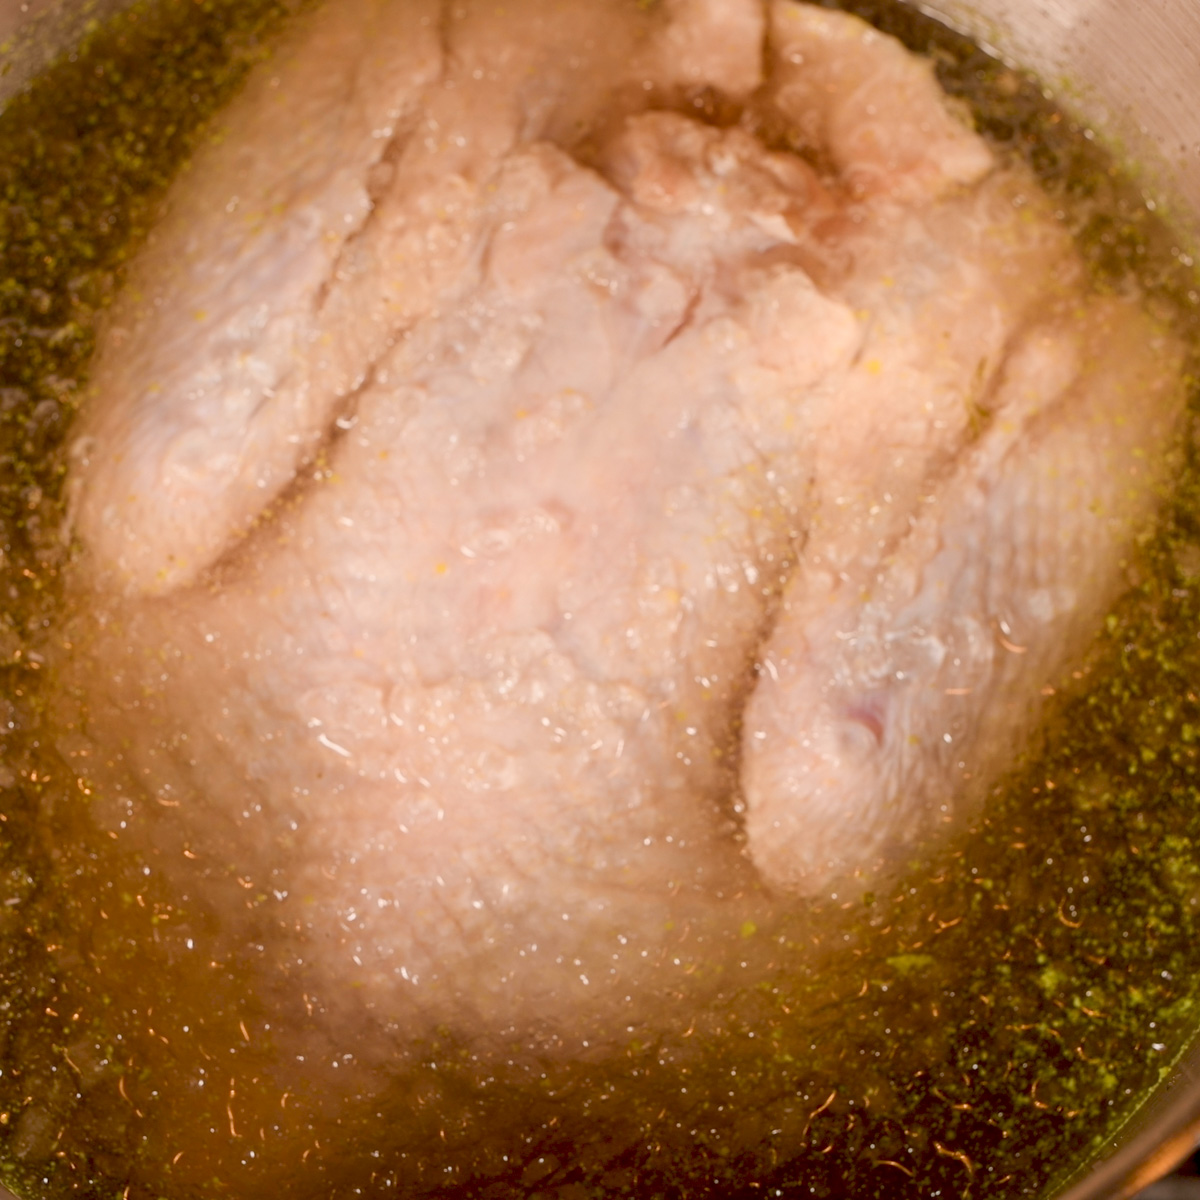 Place the turkey in the brine.